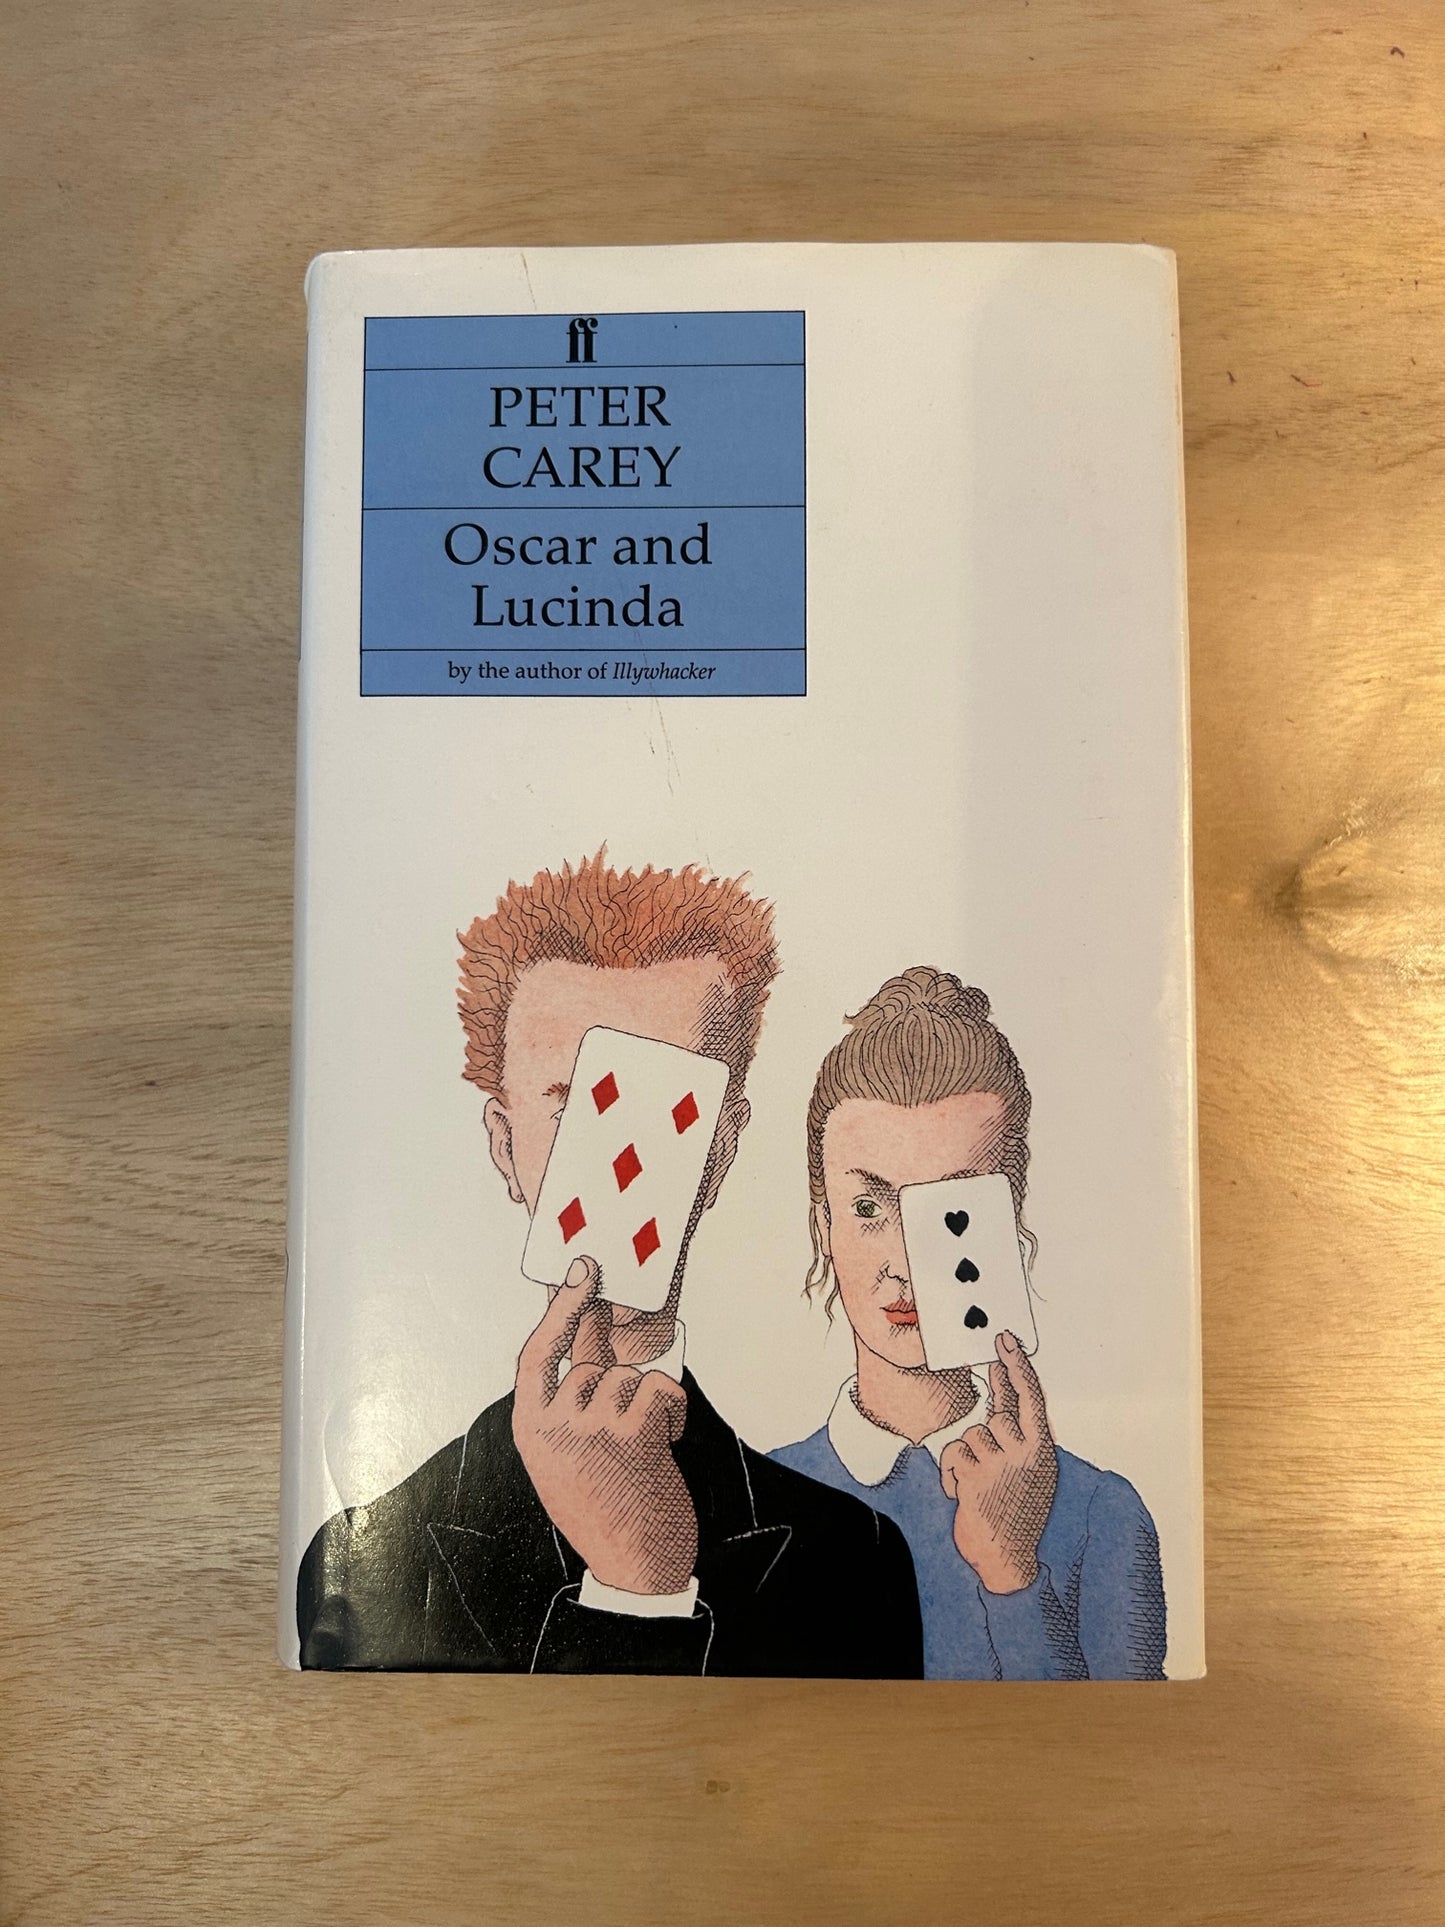 Oscar and Lucinda by Peter Carey (A Used Hardcover Edition)